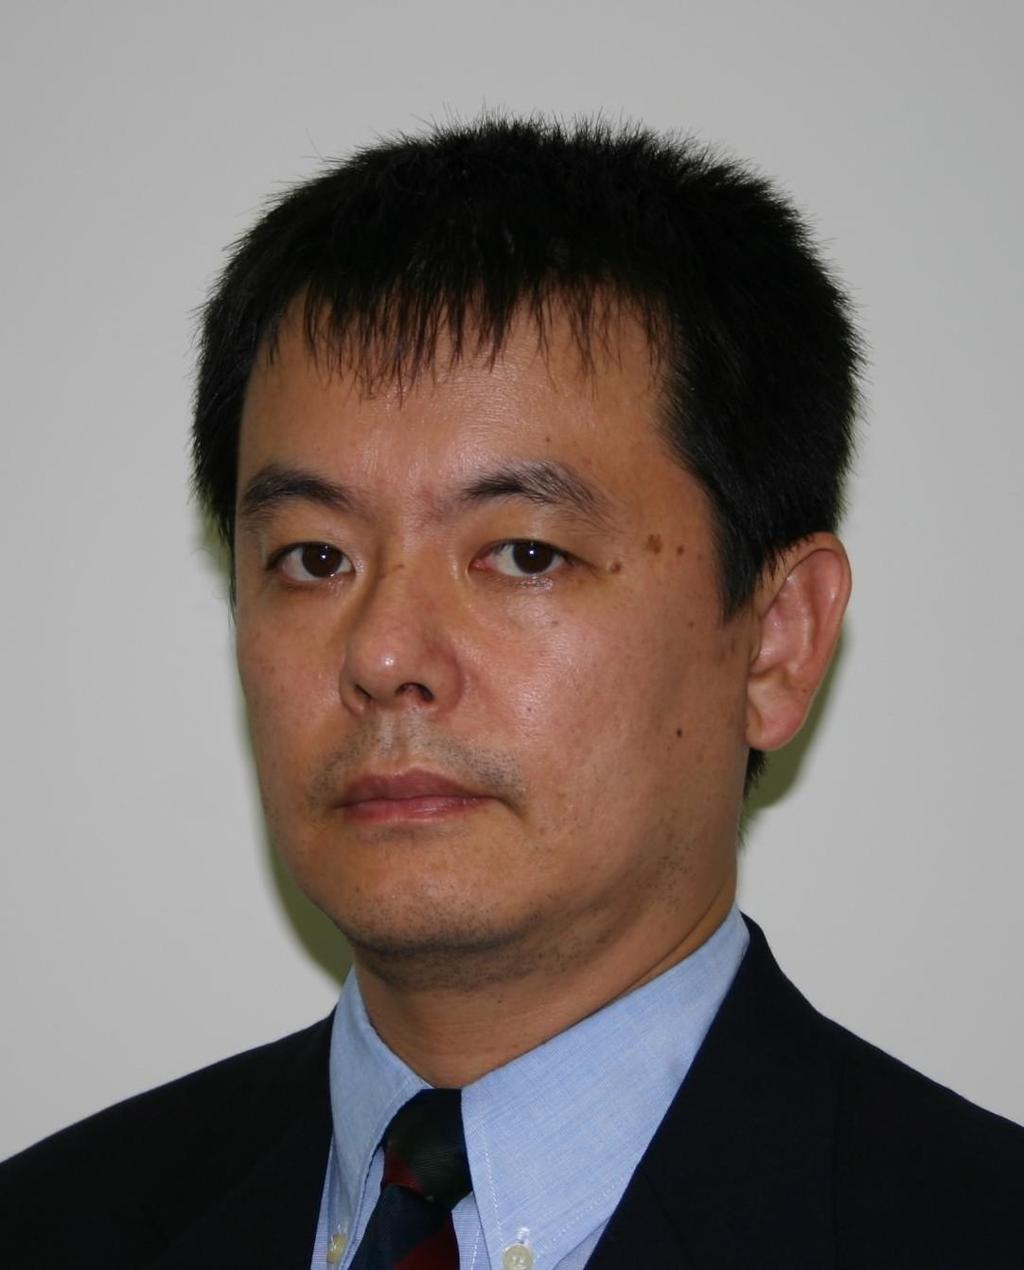 8 K. Iramina: Effect of Transcranial Magnetic Stimulation(TMS) on Visual Search Task (1-8) K. Iramina received his Ph.D degree in Engineering from Kyushu University, Japan, in 1991.